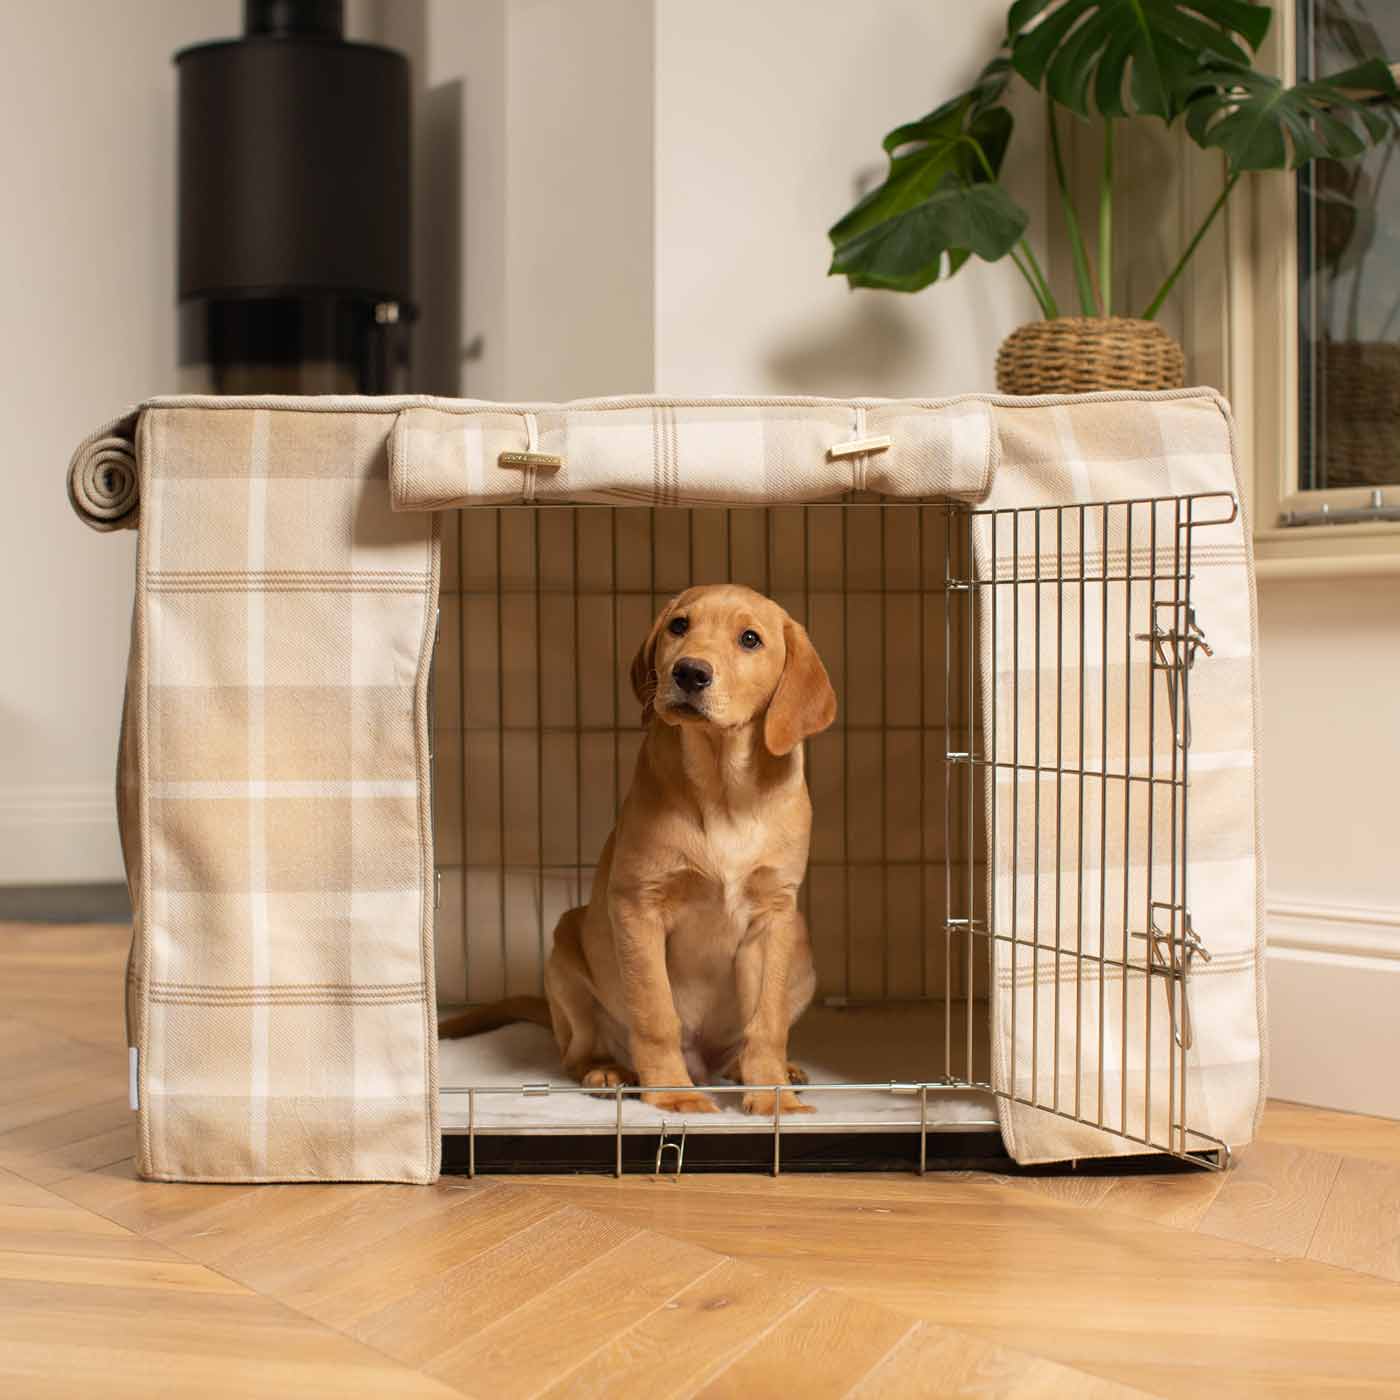 Luxury Silver Dog Cage Set With Bumper, The Perfect Dog Crate For The Ultimate Naptime, Available Now at Lords & Labradors US